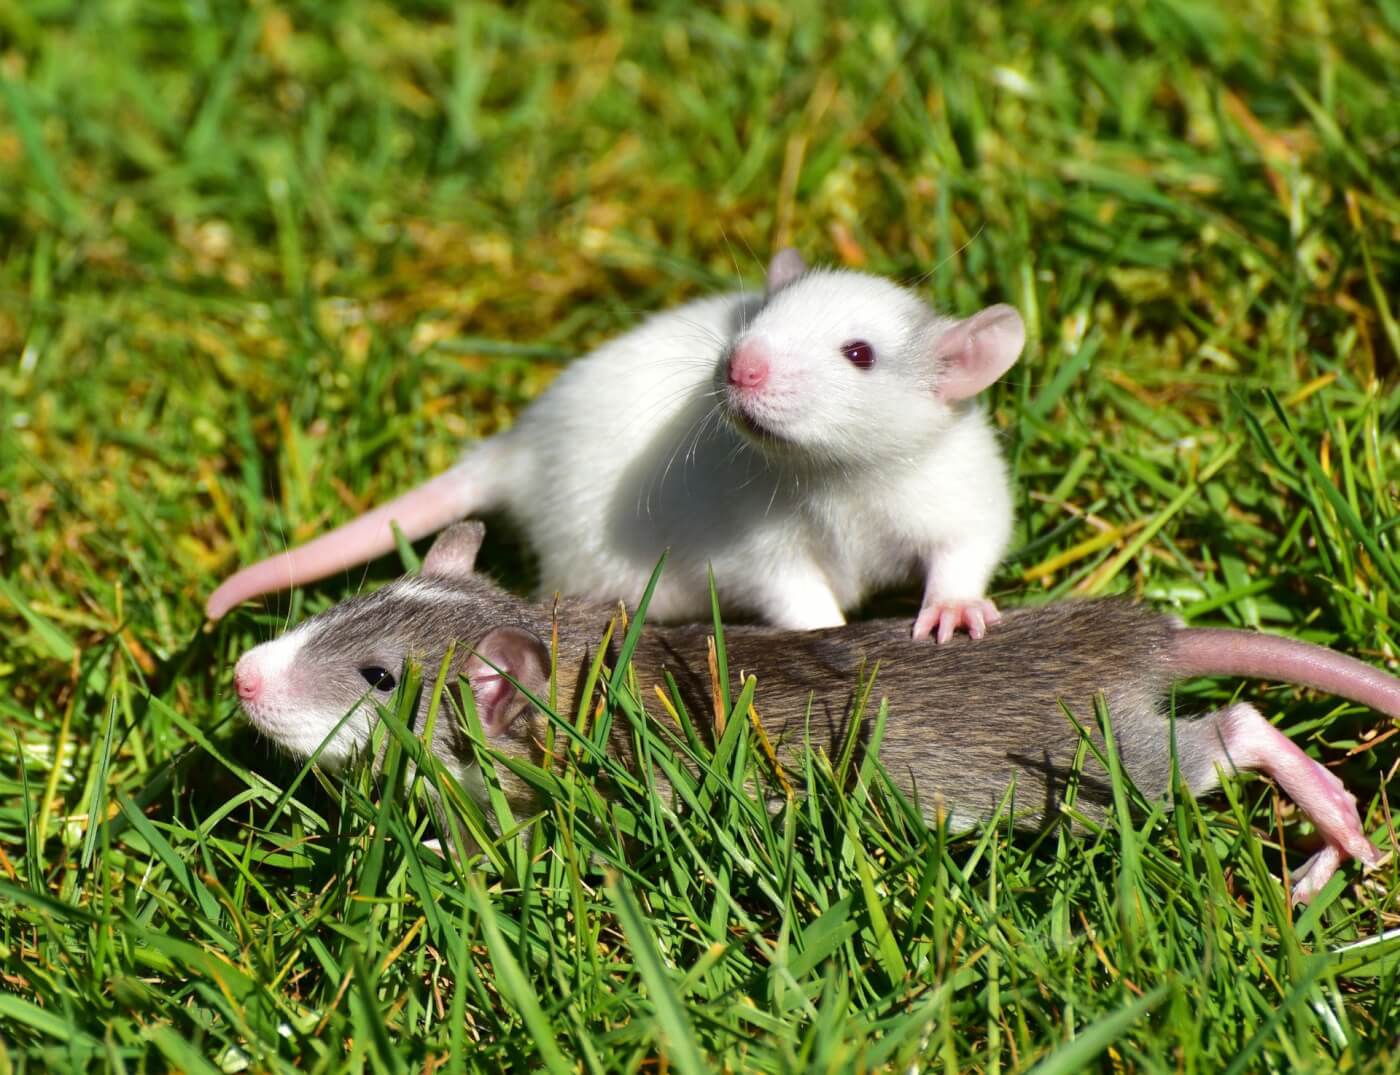 White and gray rats or mice playing in the grass